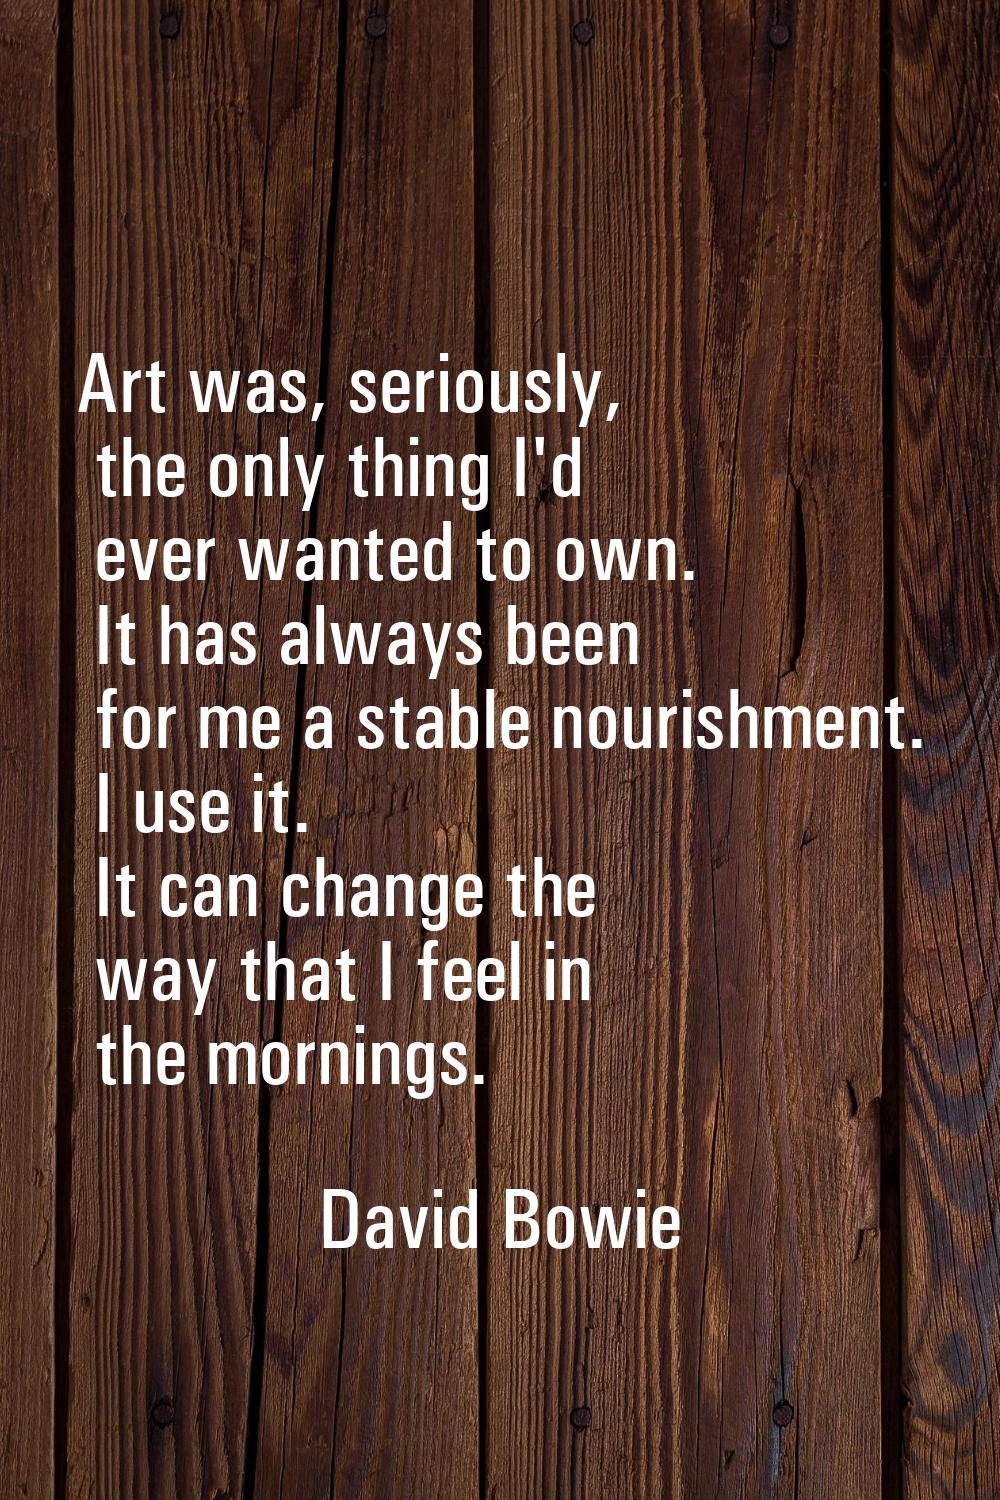 Art was, seriously, the only thing I'd ever wanted to own. It has always been for me a stable nouri